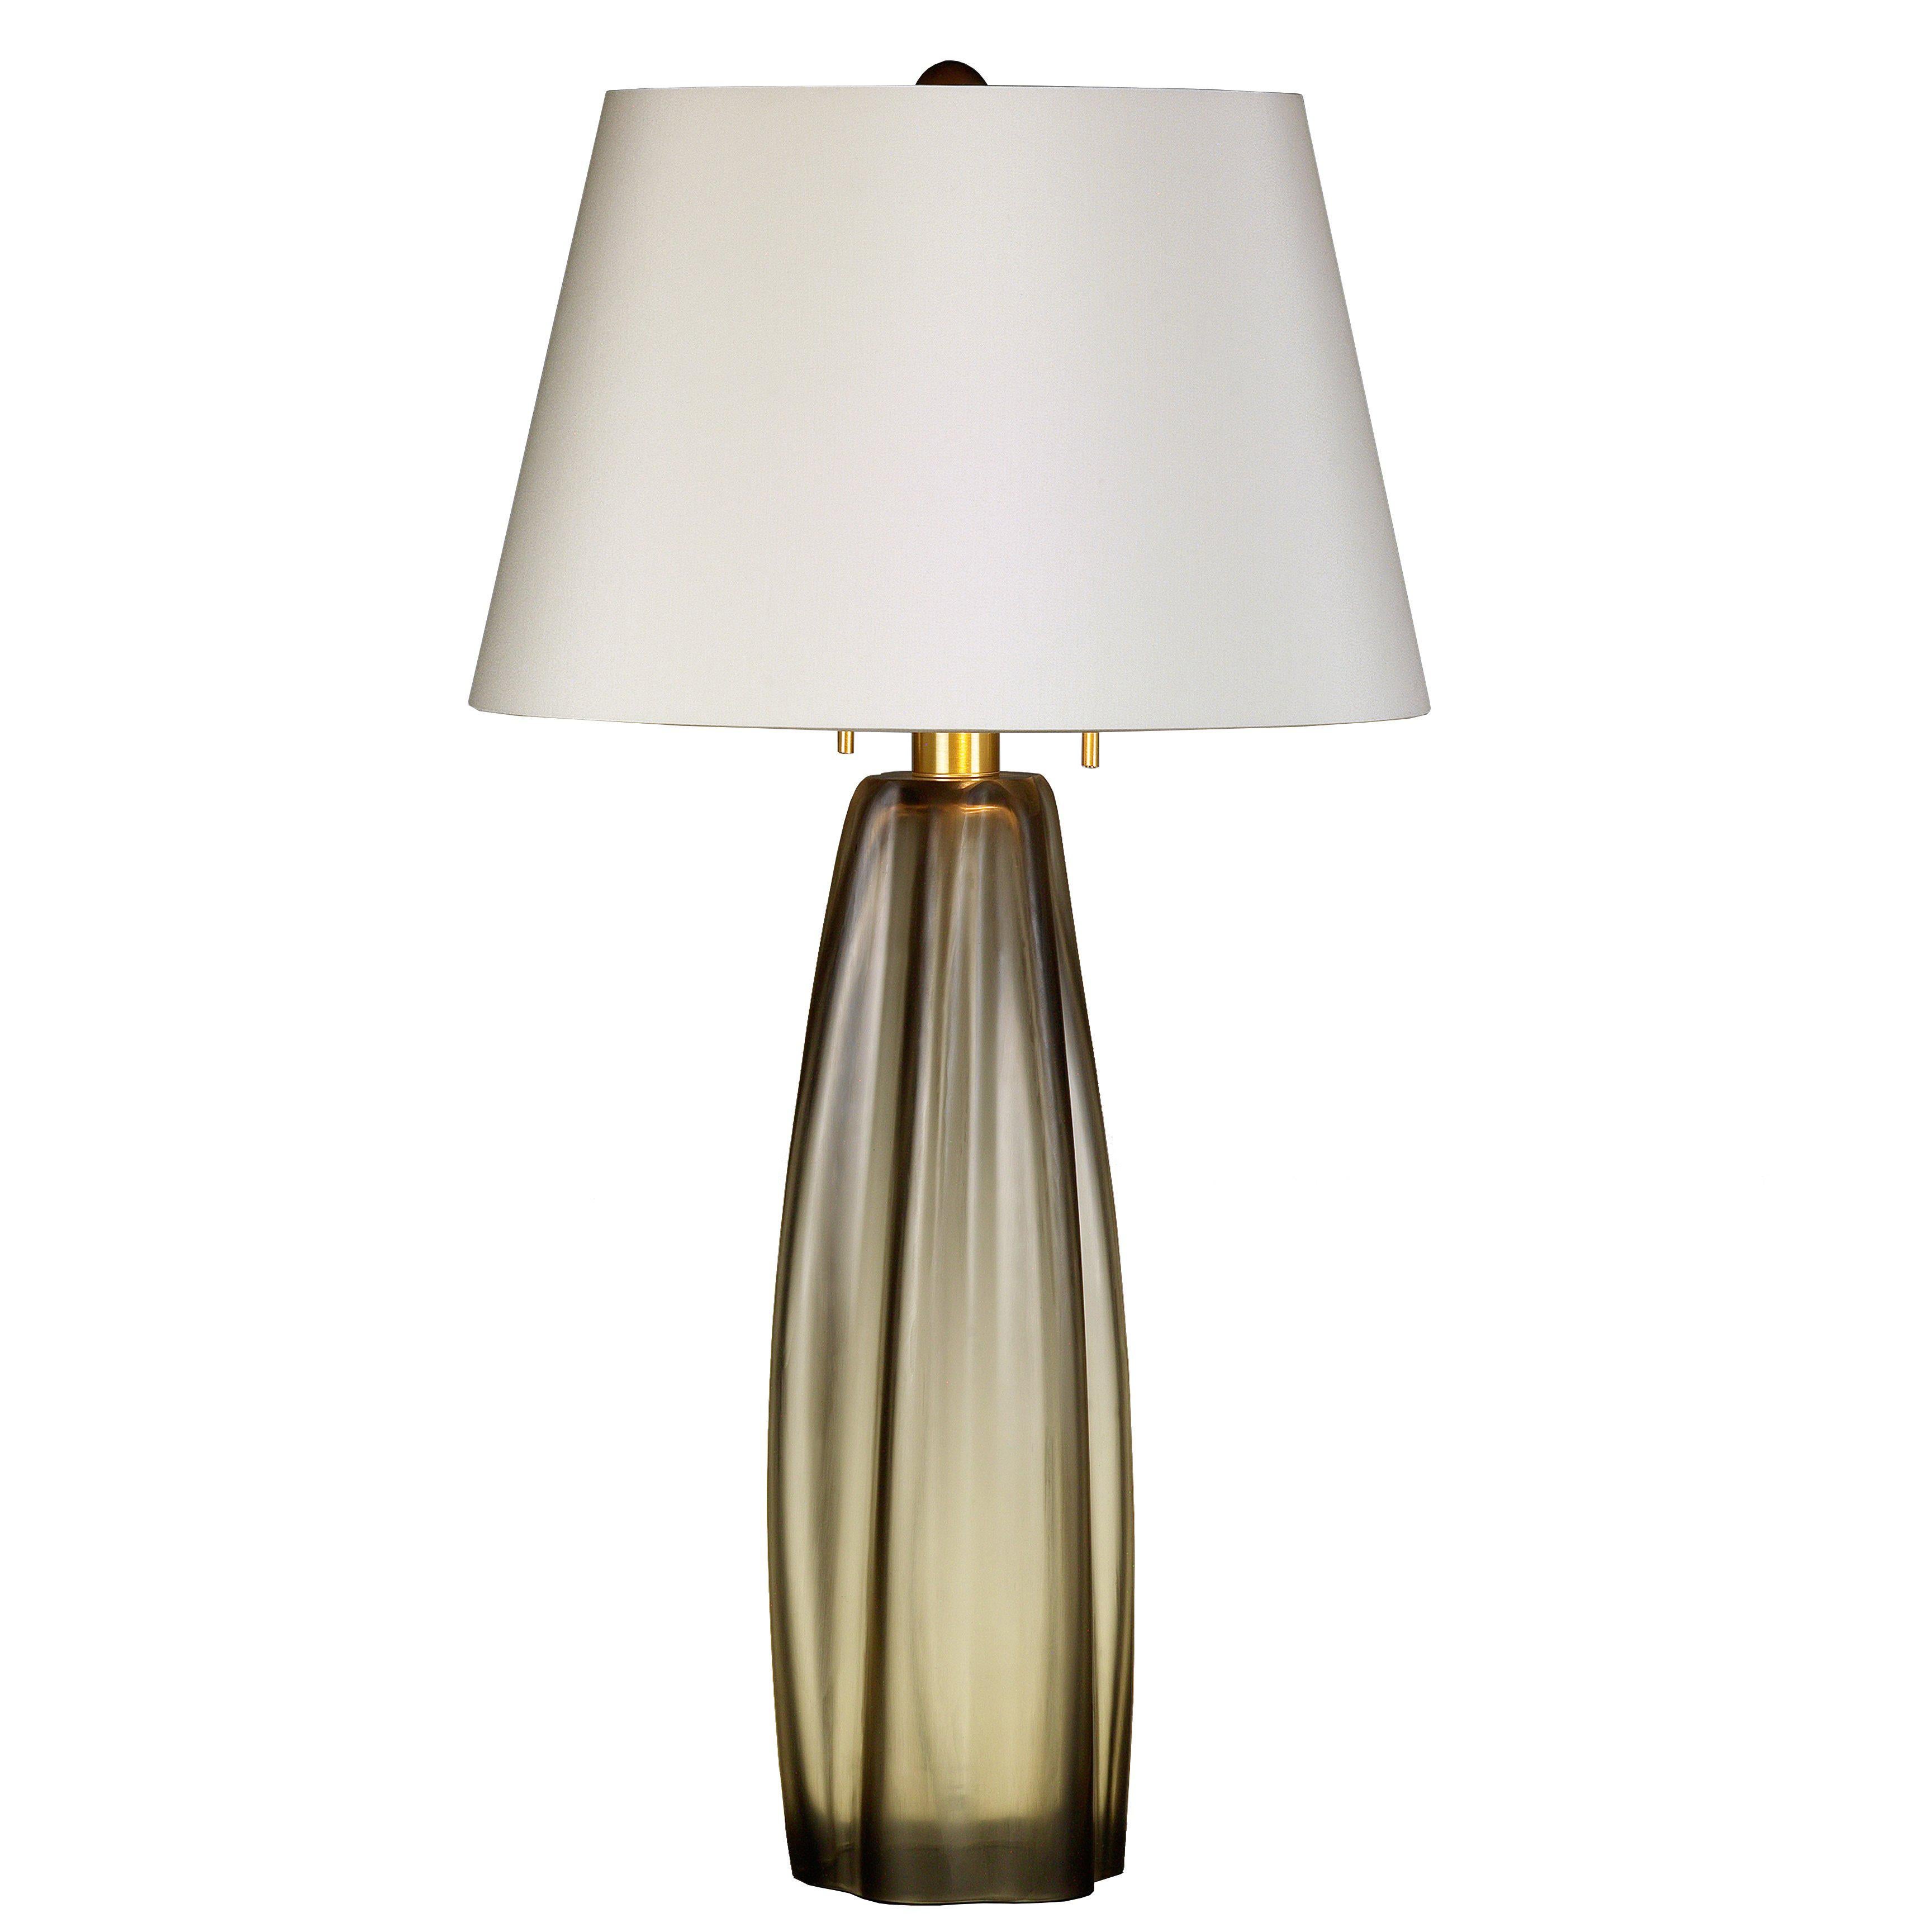 Donghia Margot Table Lamp and Shade, Murano Glass in Sepia with Satin Finish For Sale